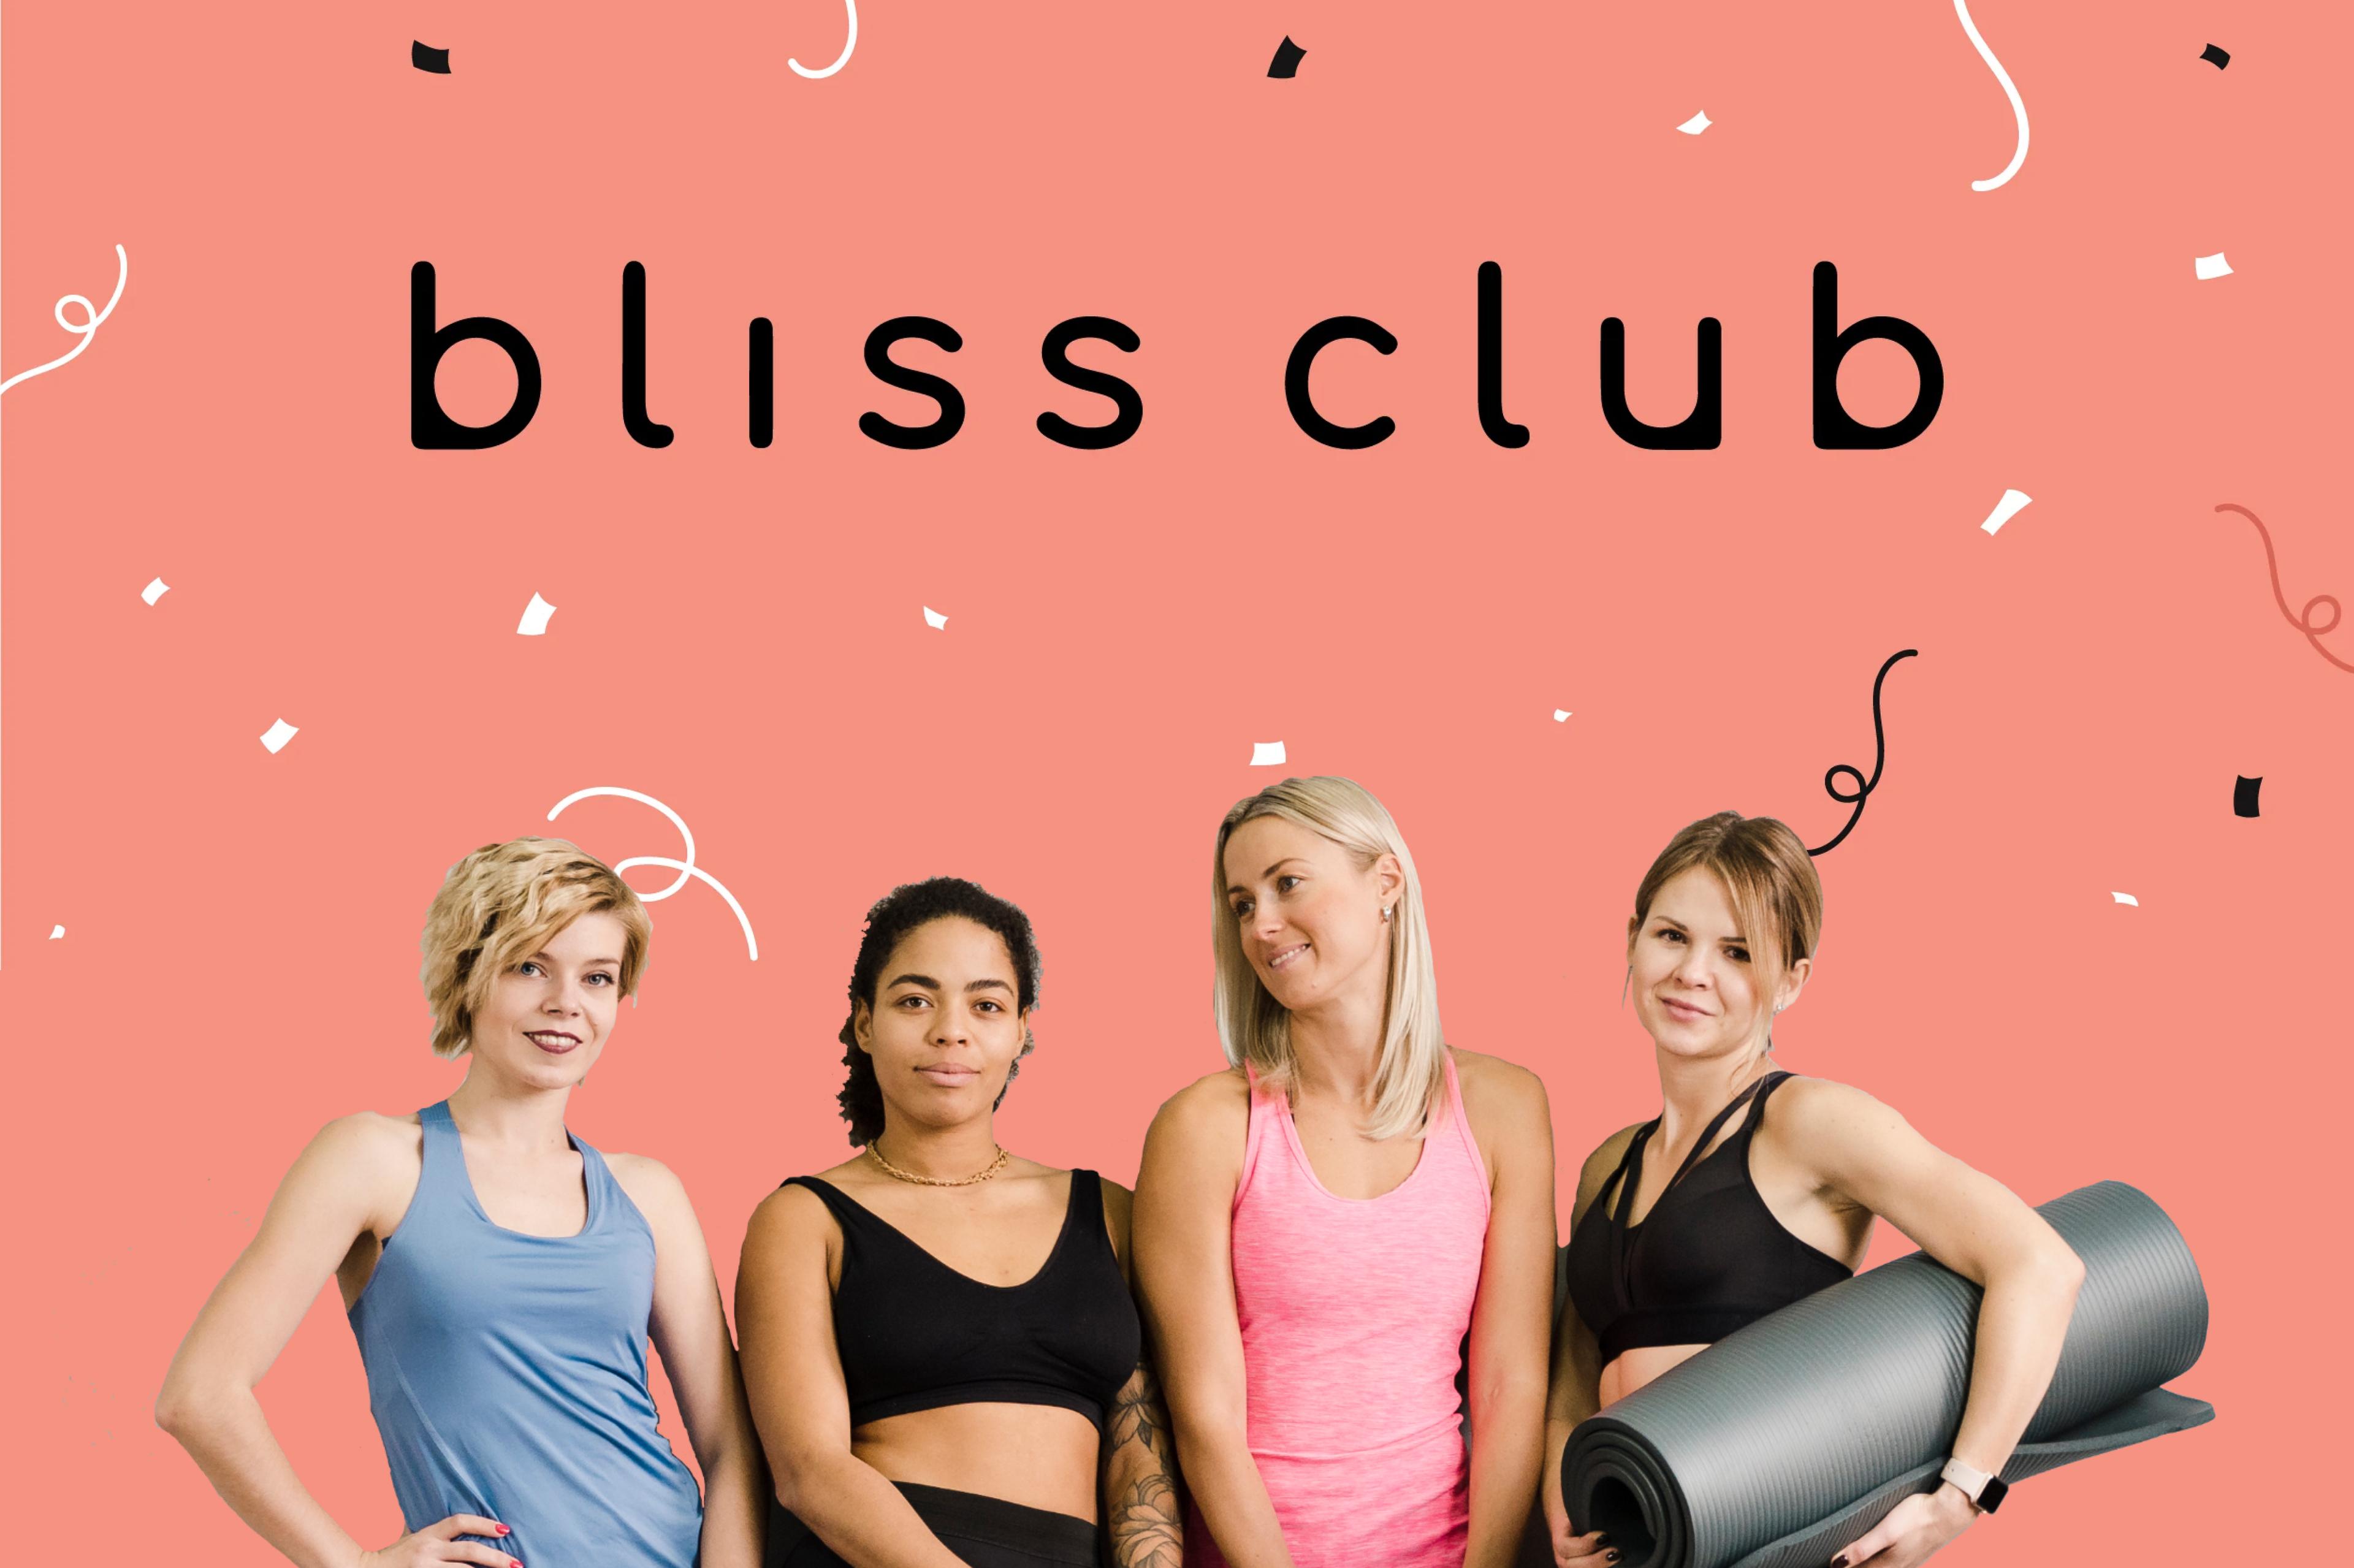 Blissclub launches Bitchclub to encourage women to prioritise self